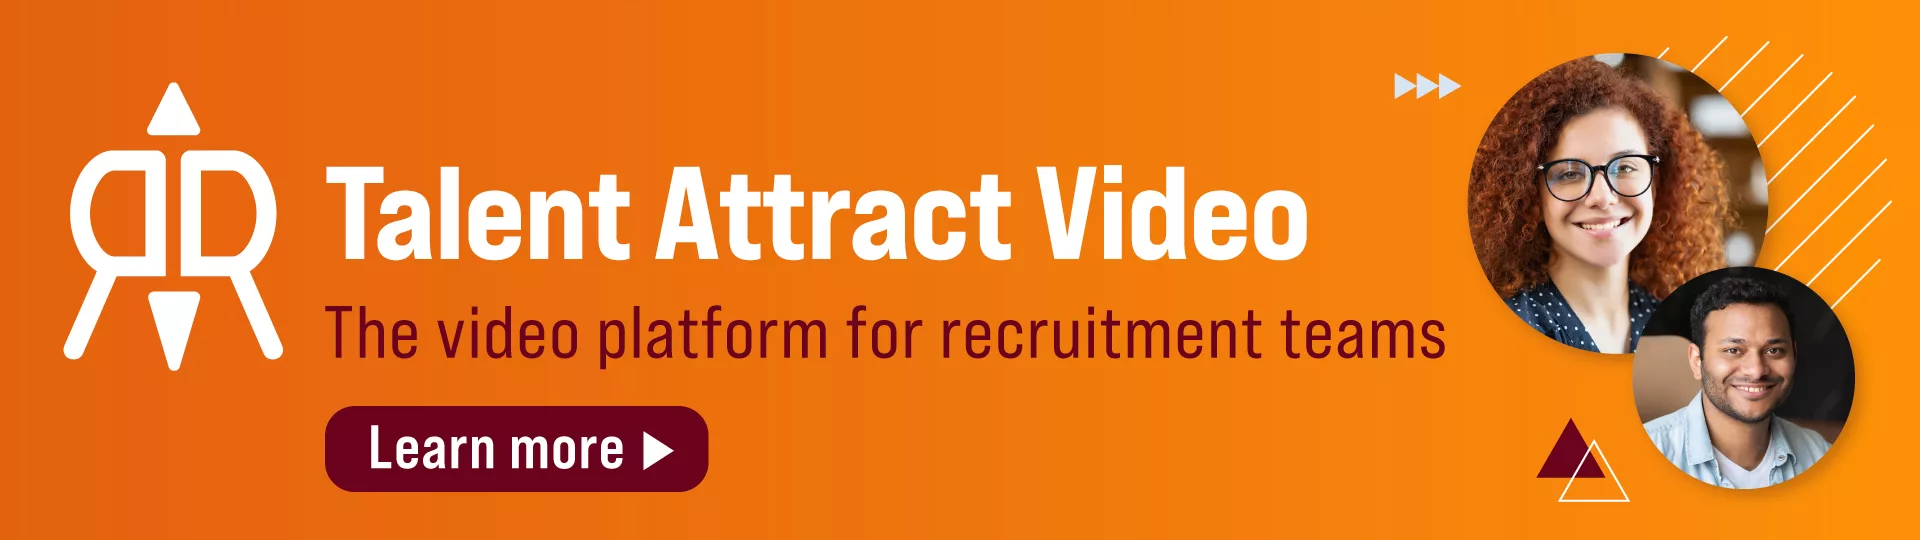 Talent Attract Video, the video platform for recruitment teams